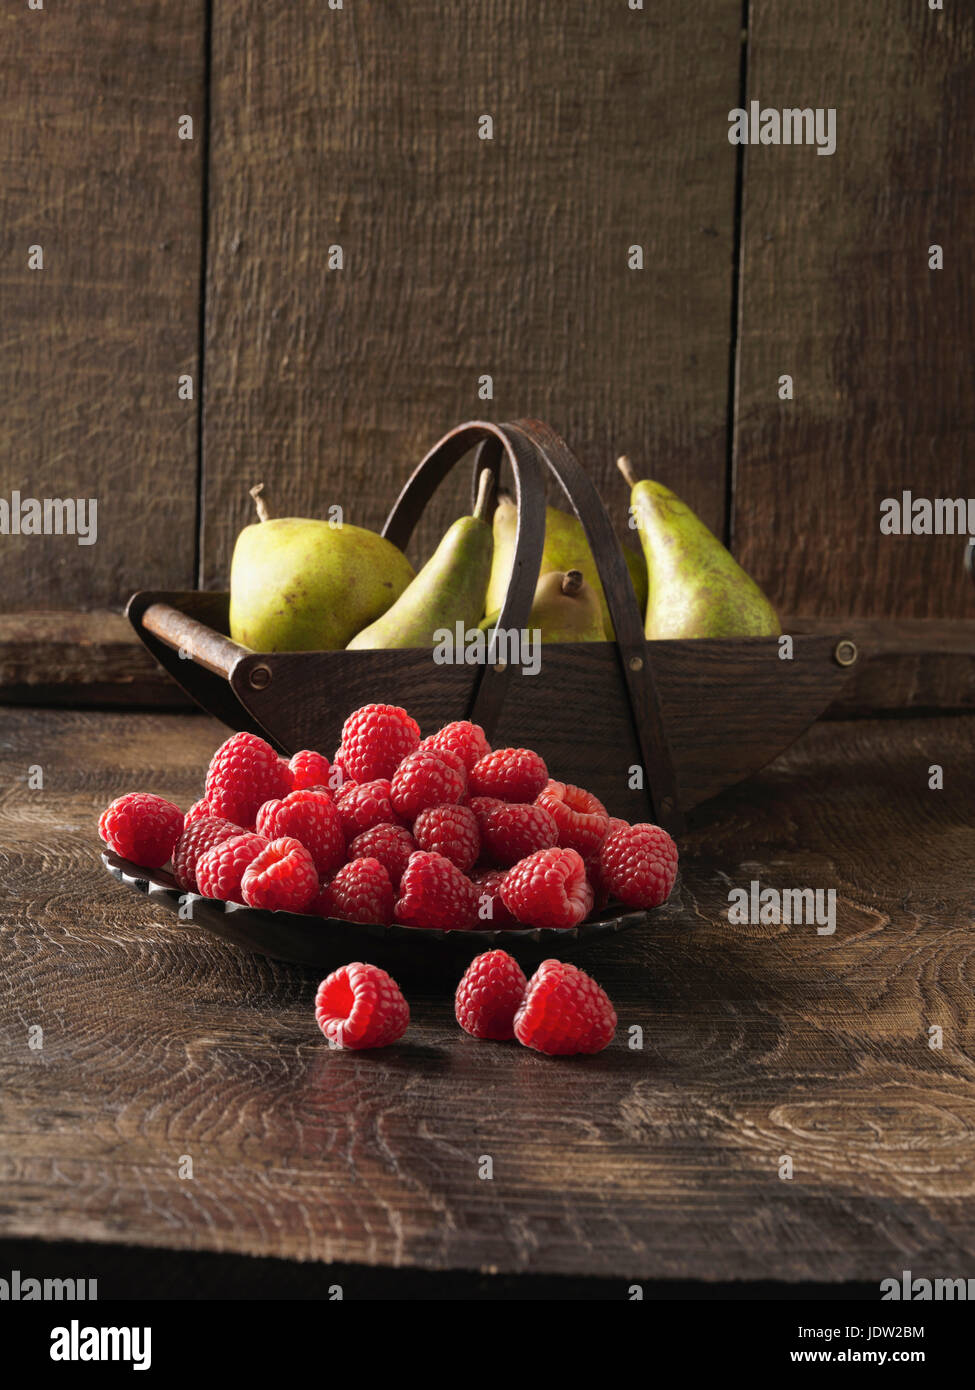 Bowl of raspberries and pears Stock Photo